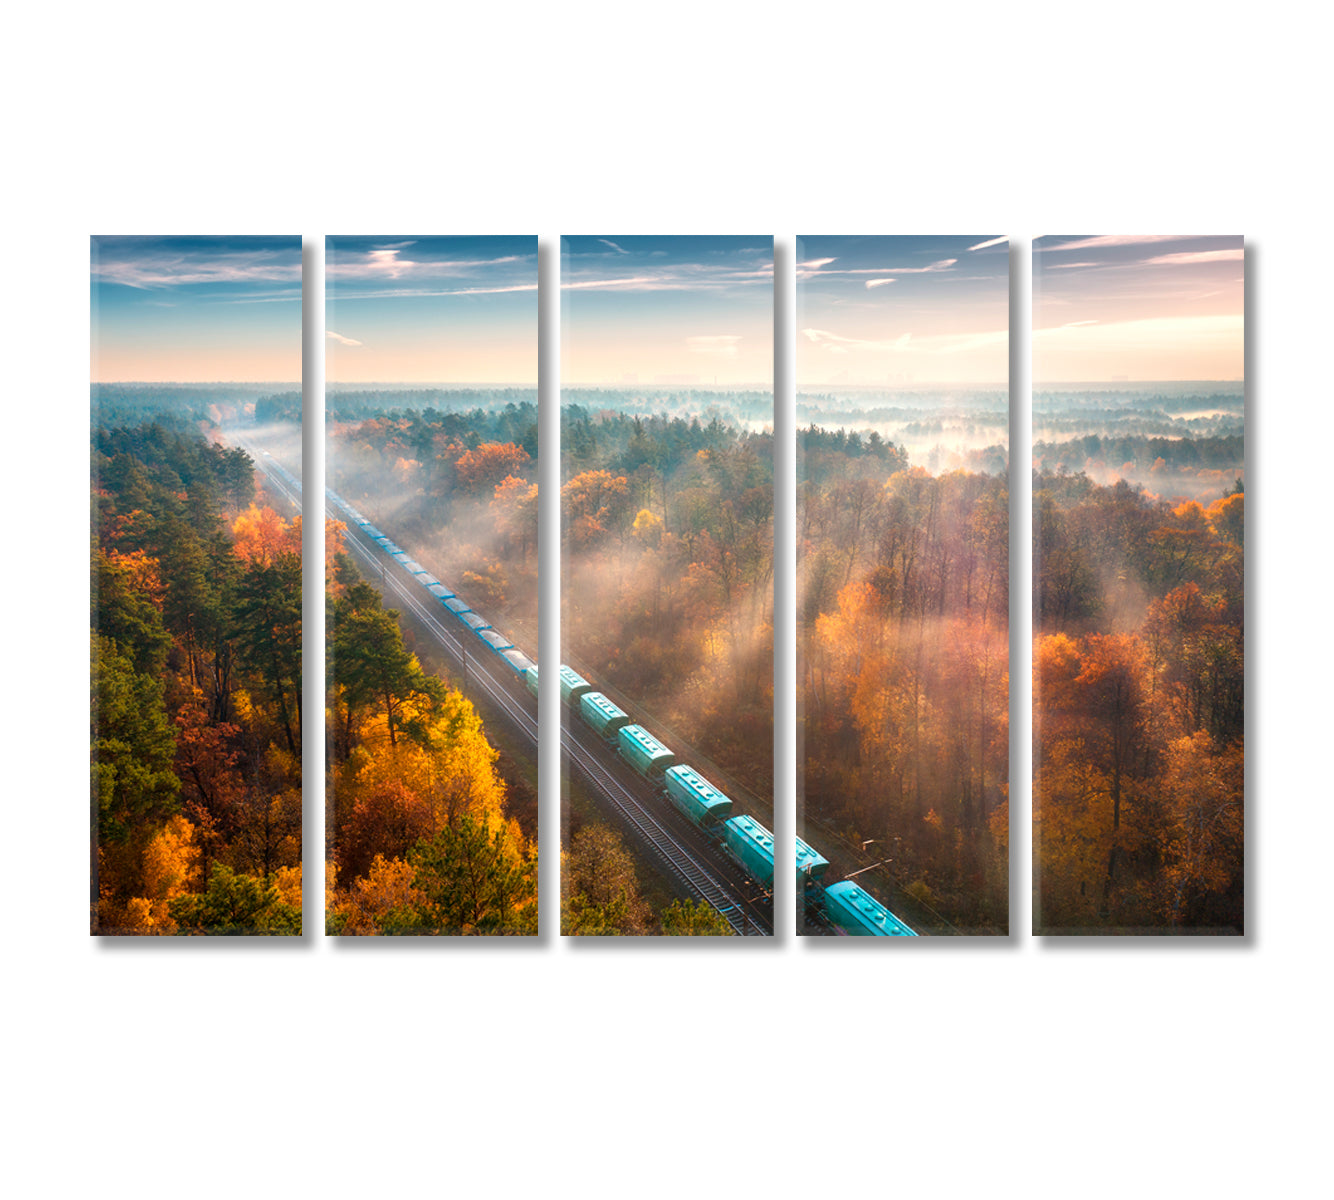 Freight Train in Beautiful Autumn Foggy Forest Canvas Print-Canvas Print-CetArt-5 Panels-36x24 inches-CetArt